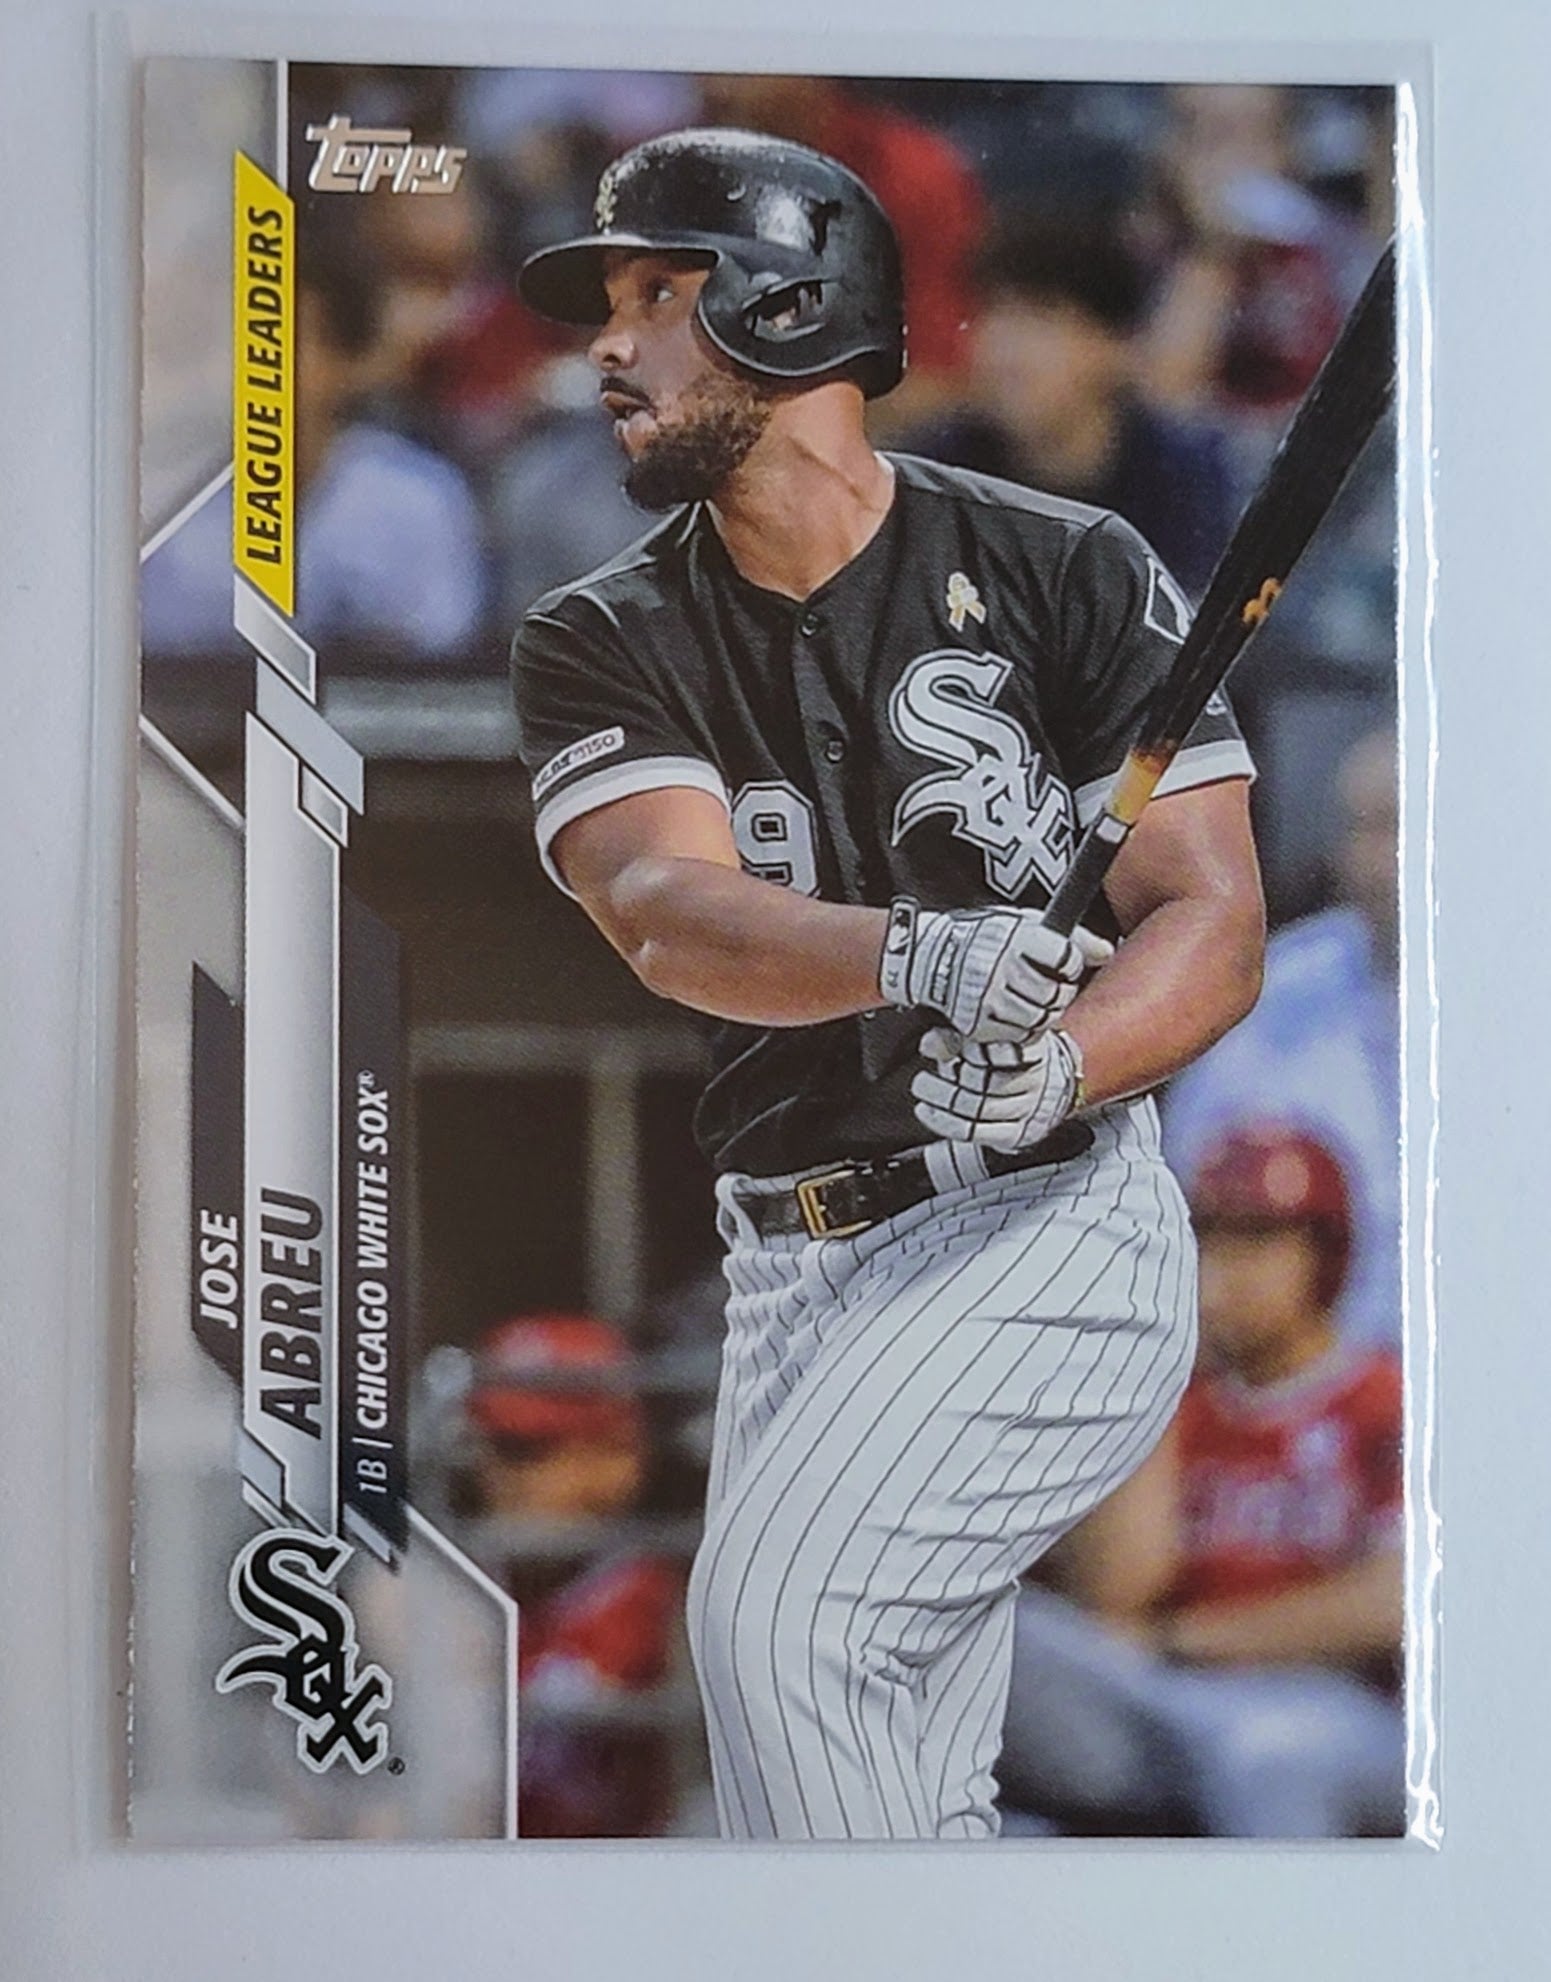 2020 Topps Jose Abreu   LL Chicago White Sox Baseball Card  TH1CB simple Xclusive Collectibles   